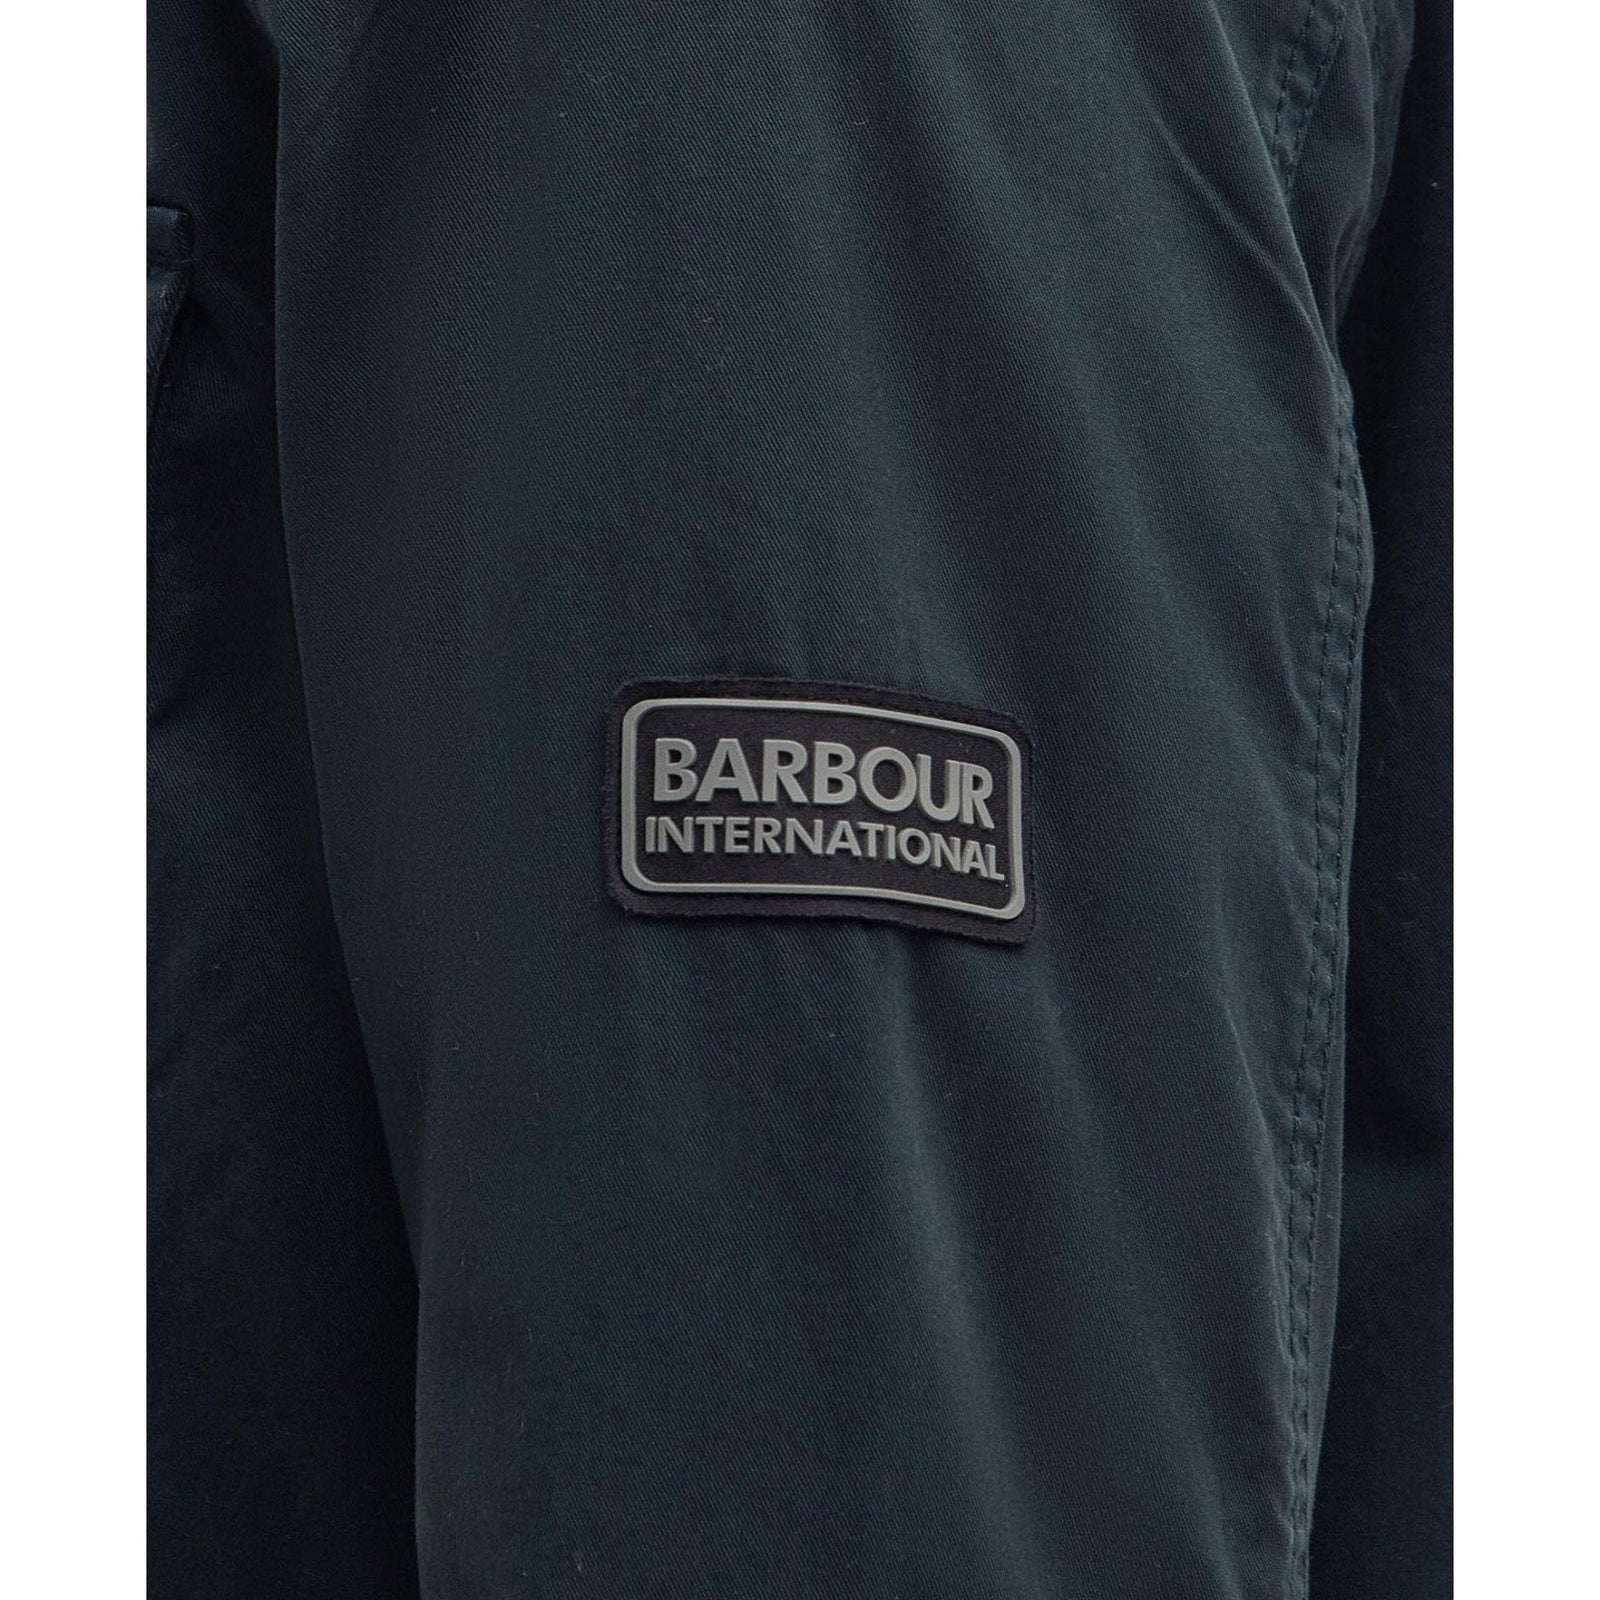 Barbour International Adey Overshirt in Forest River